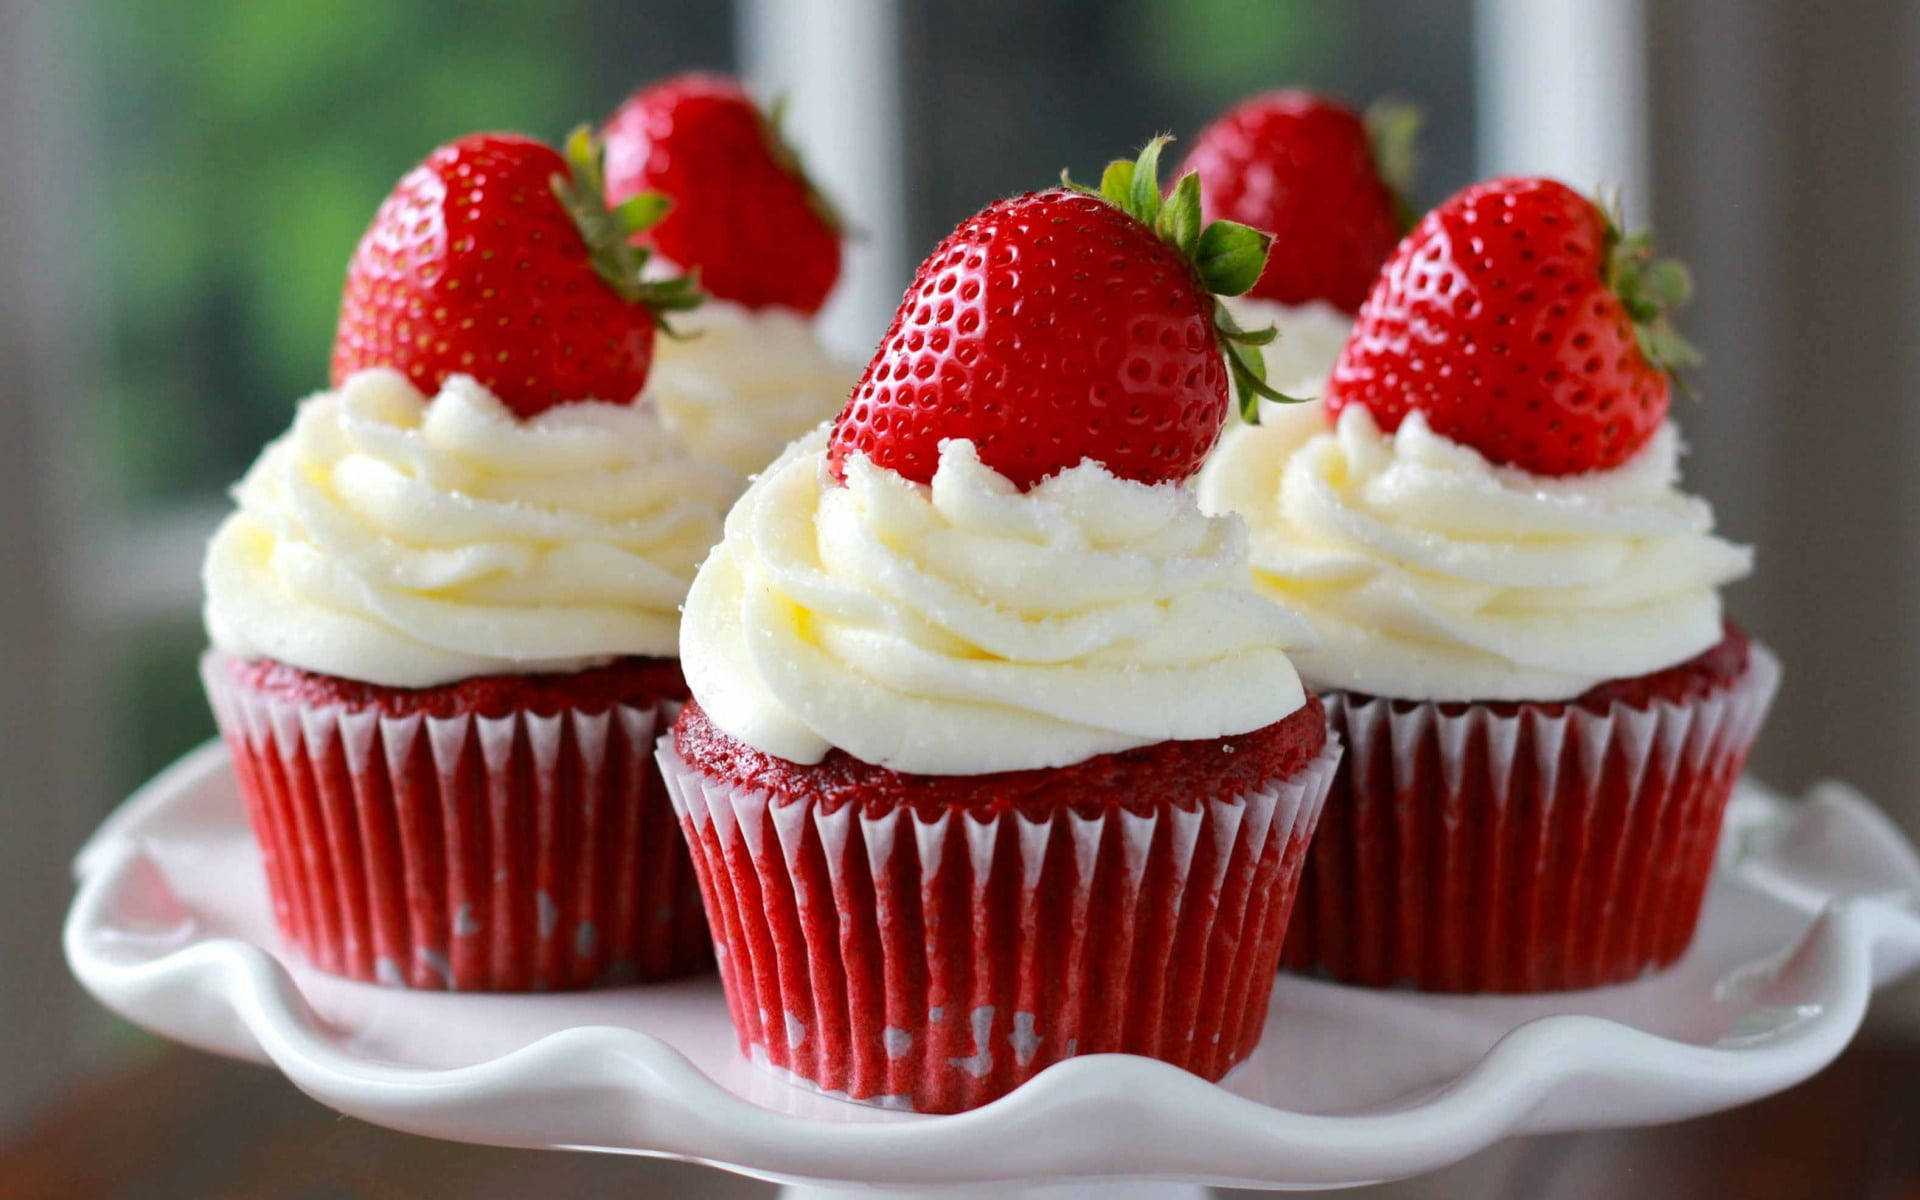 Scrumptious Red Cupcakes with Fresh Strawberries on Top Wallpaper